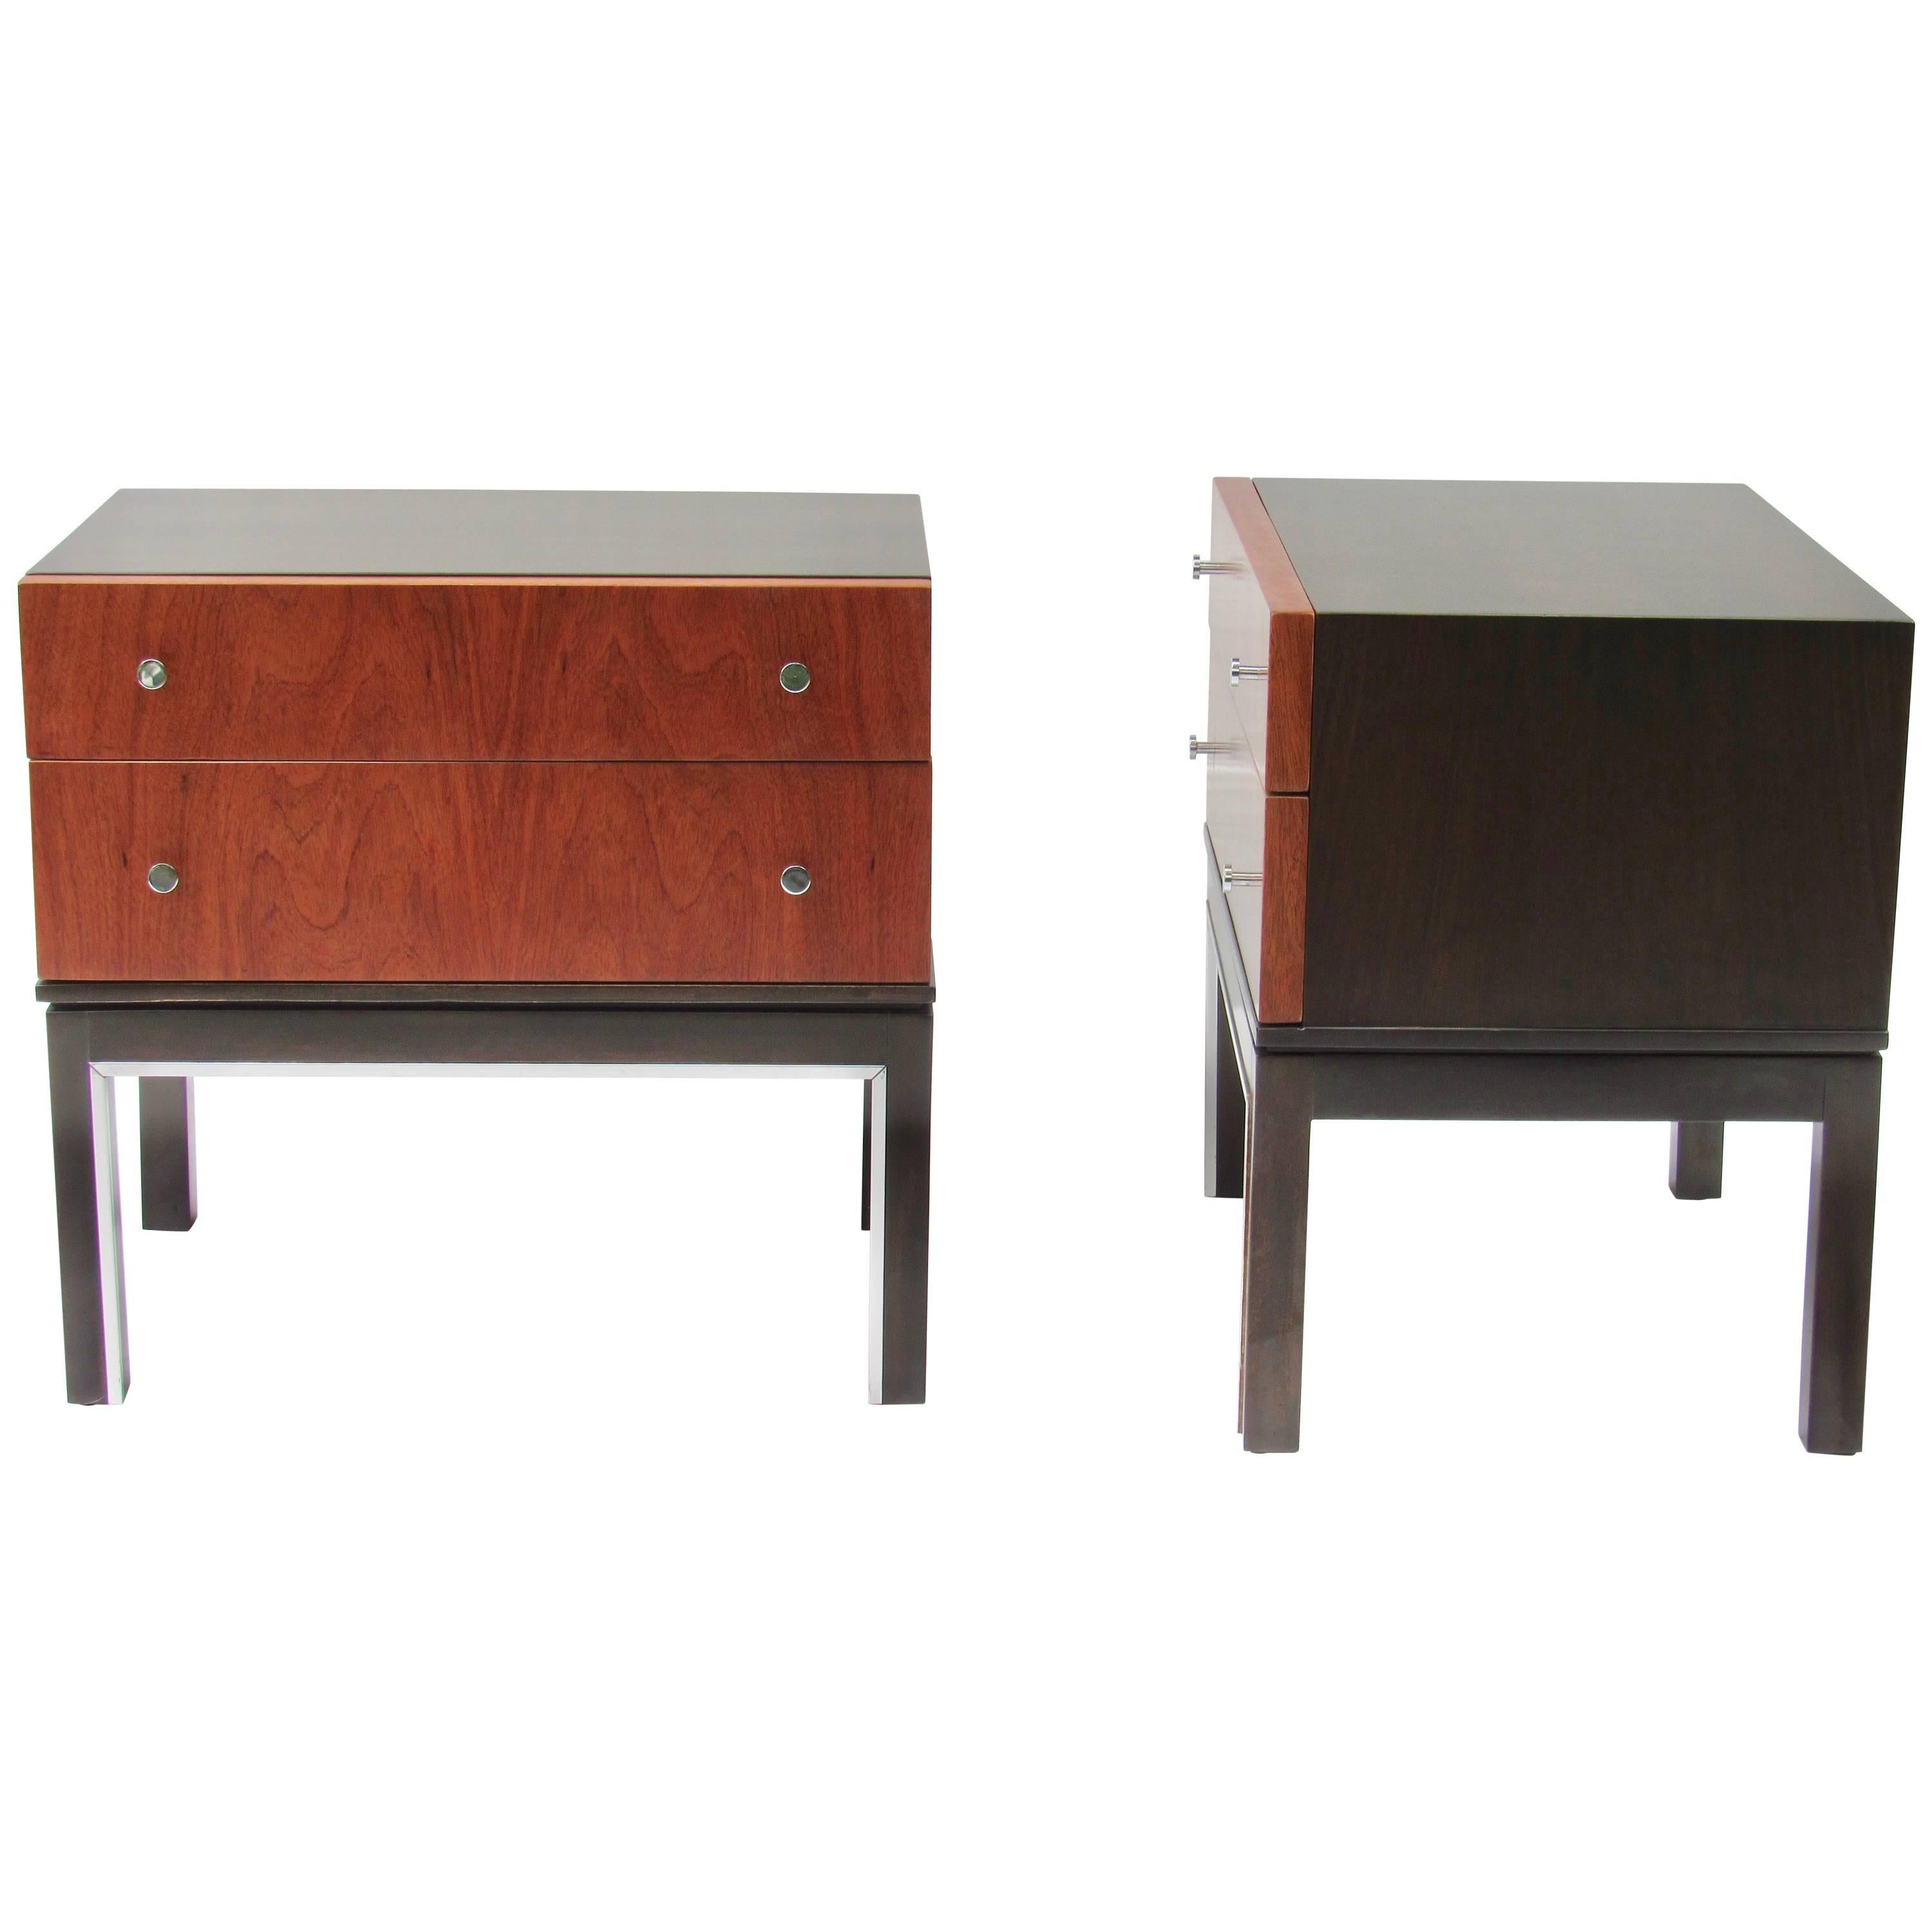 Merton Gershun Two-Toned Walnut End Tables for American of Martinsville